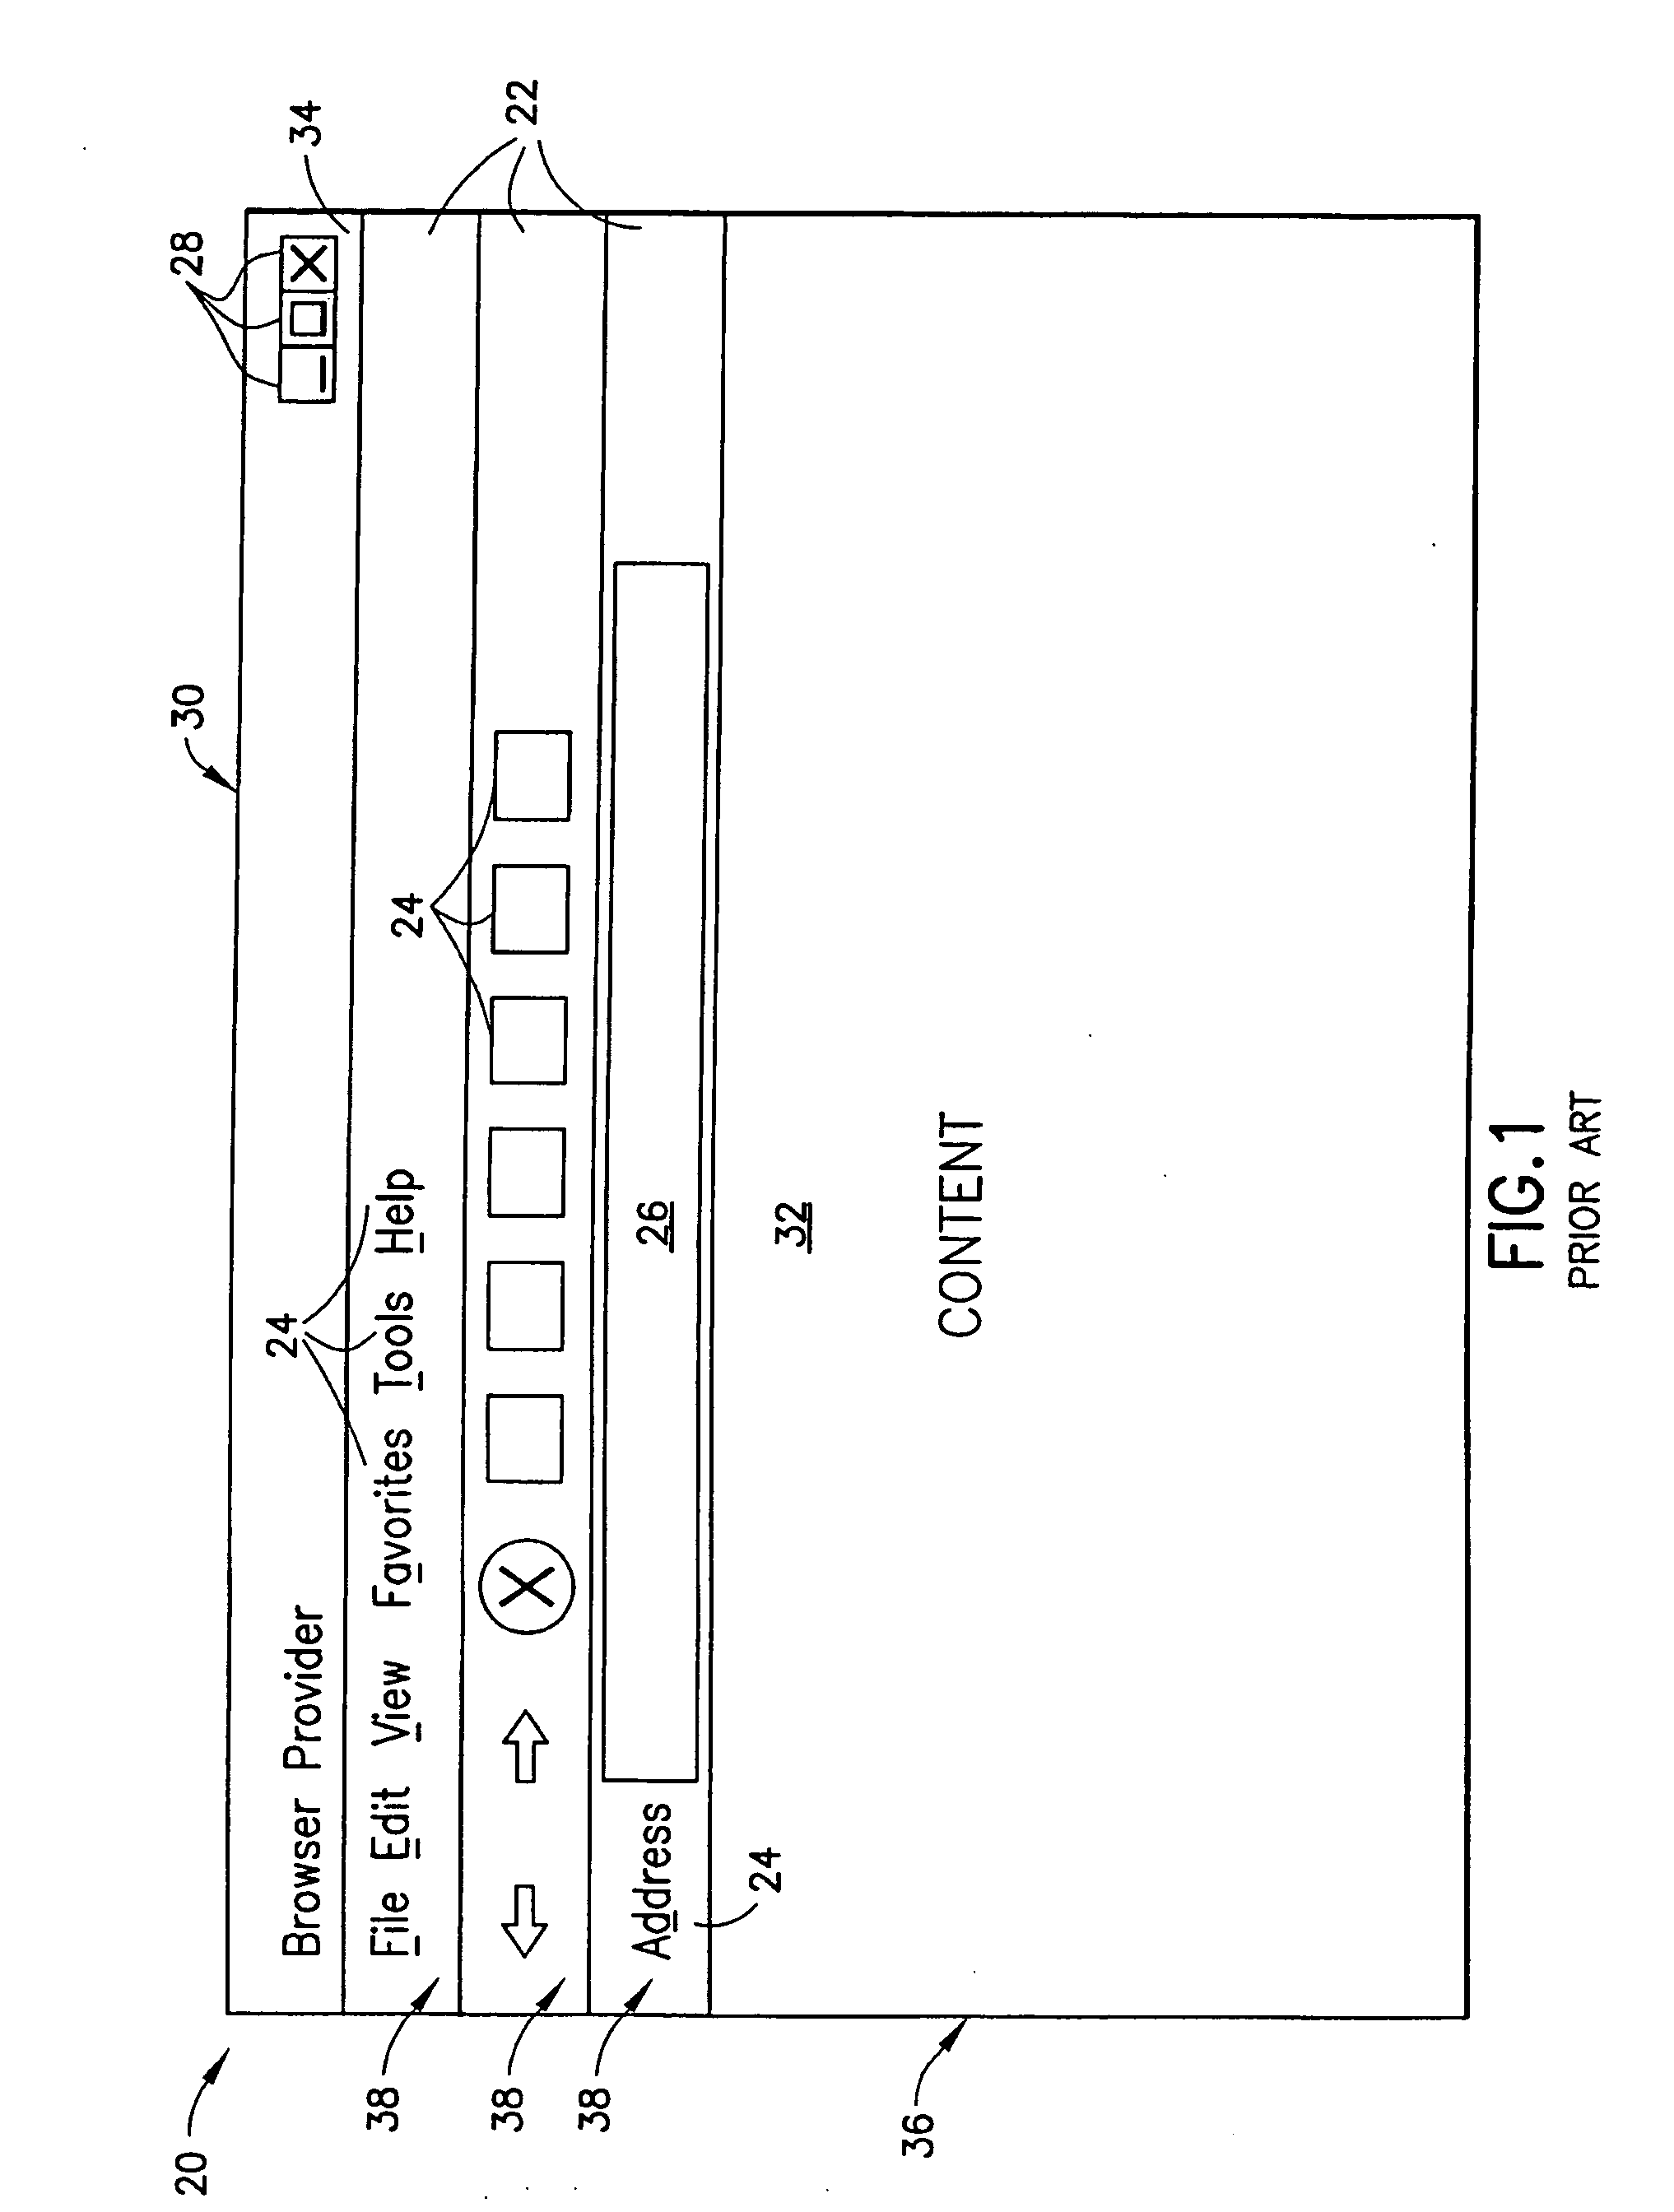 Method and system of facilitating on-line shopping using a control object and a predetermined site